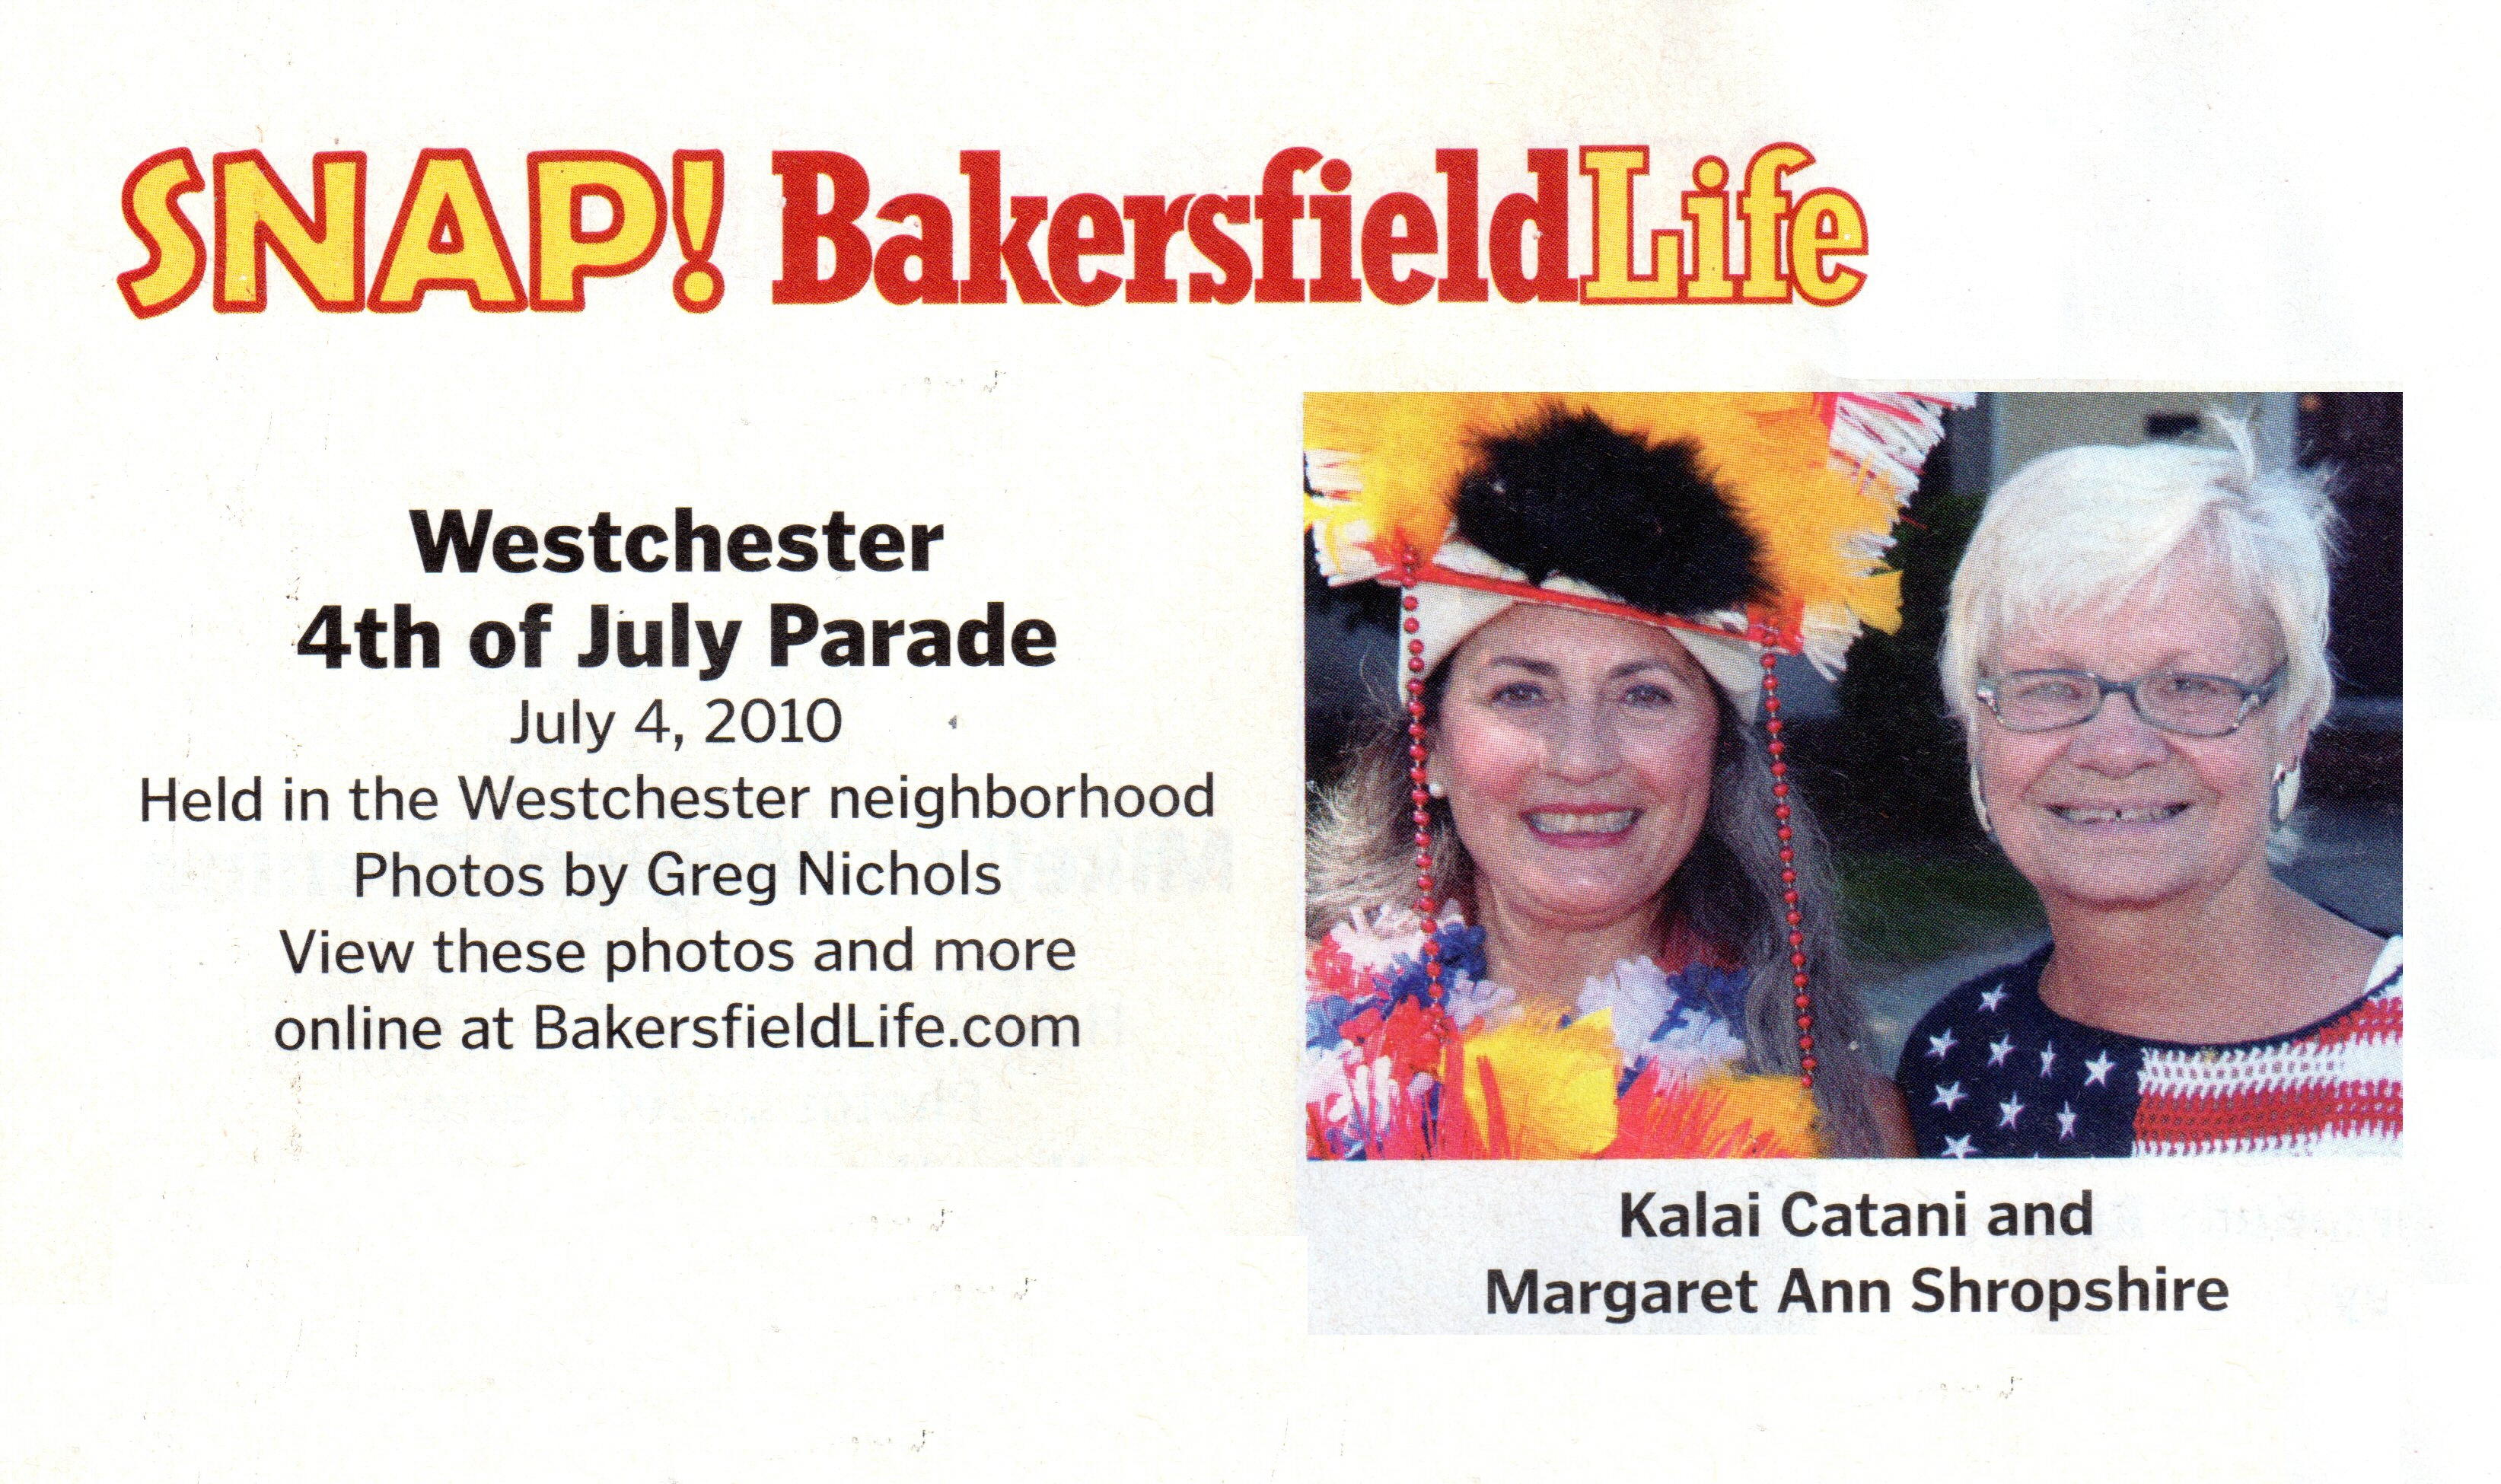 Kalai and Margaret Shropshire 4th of July2010, Westchester Parade